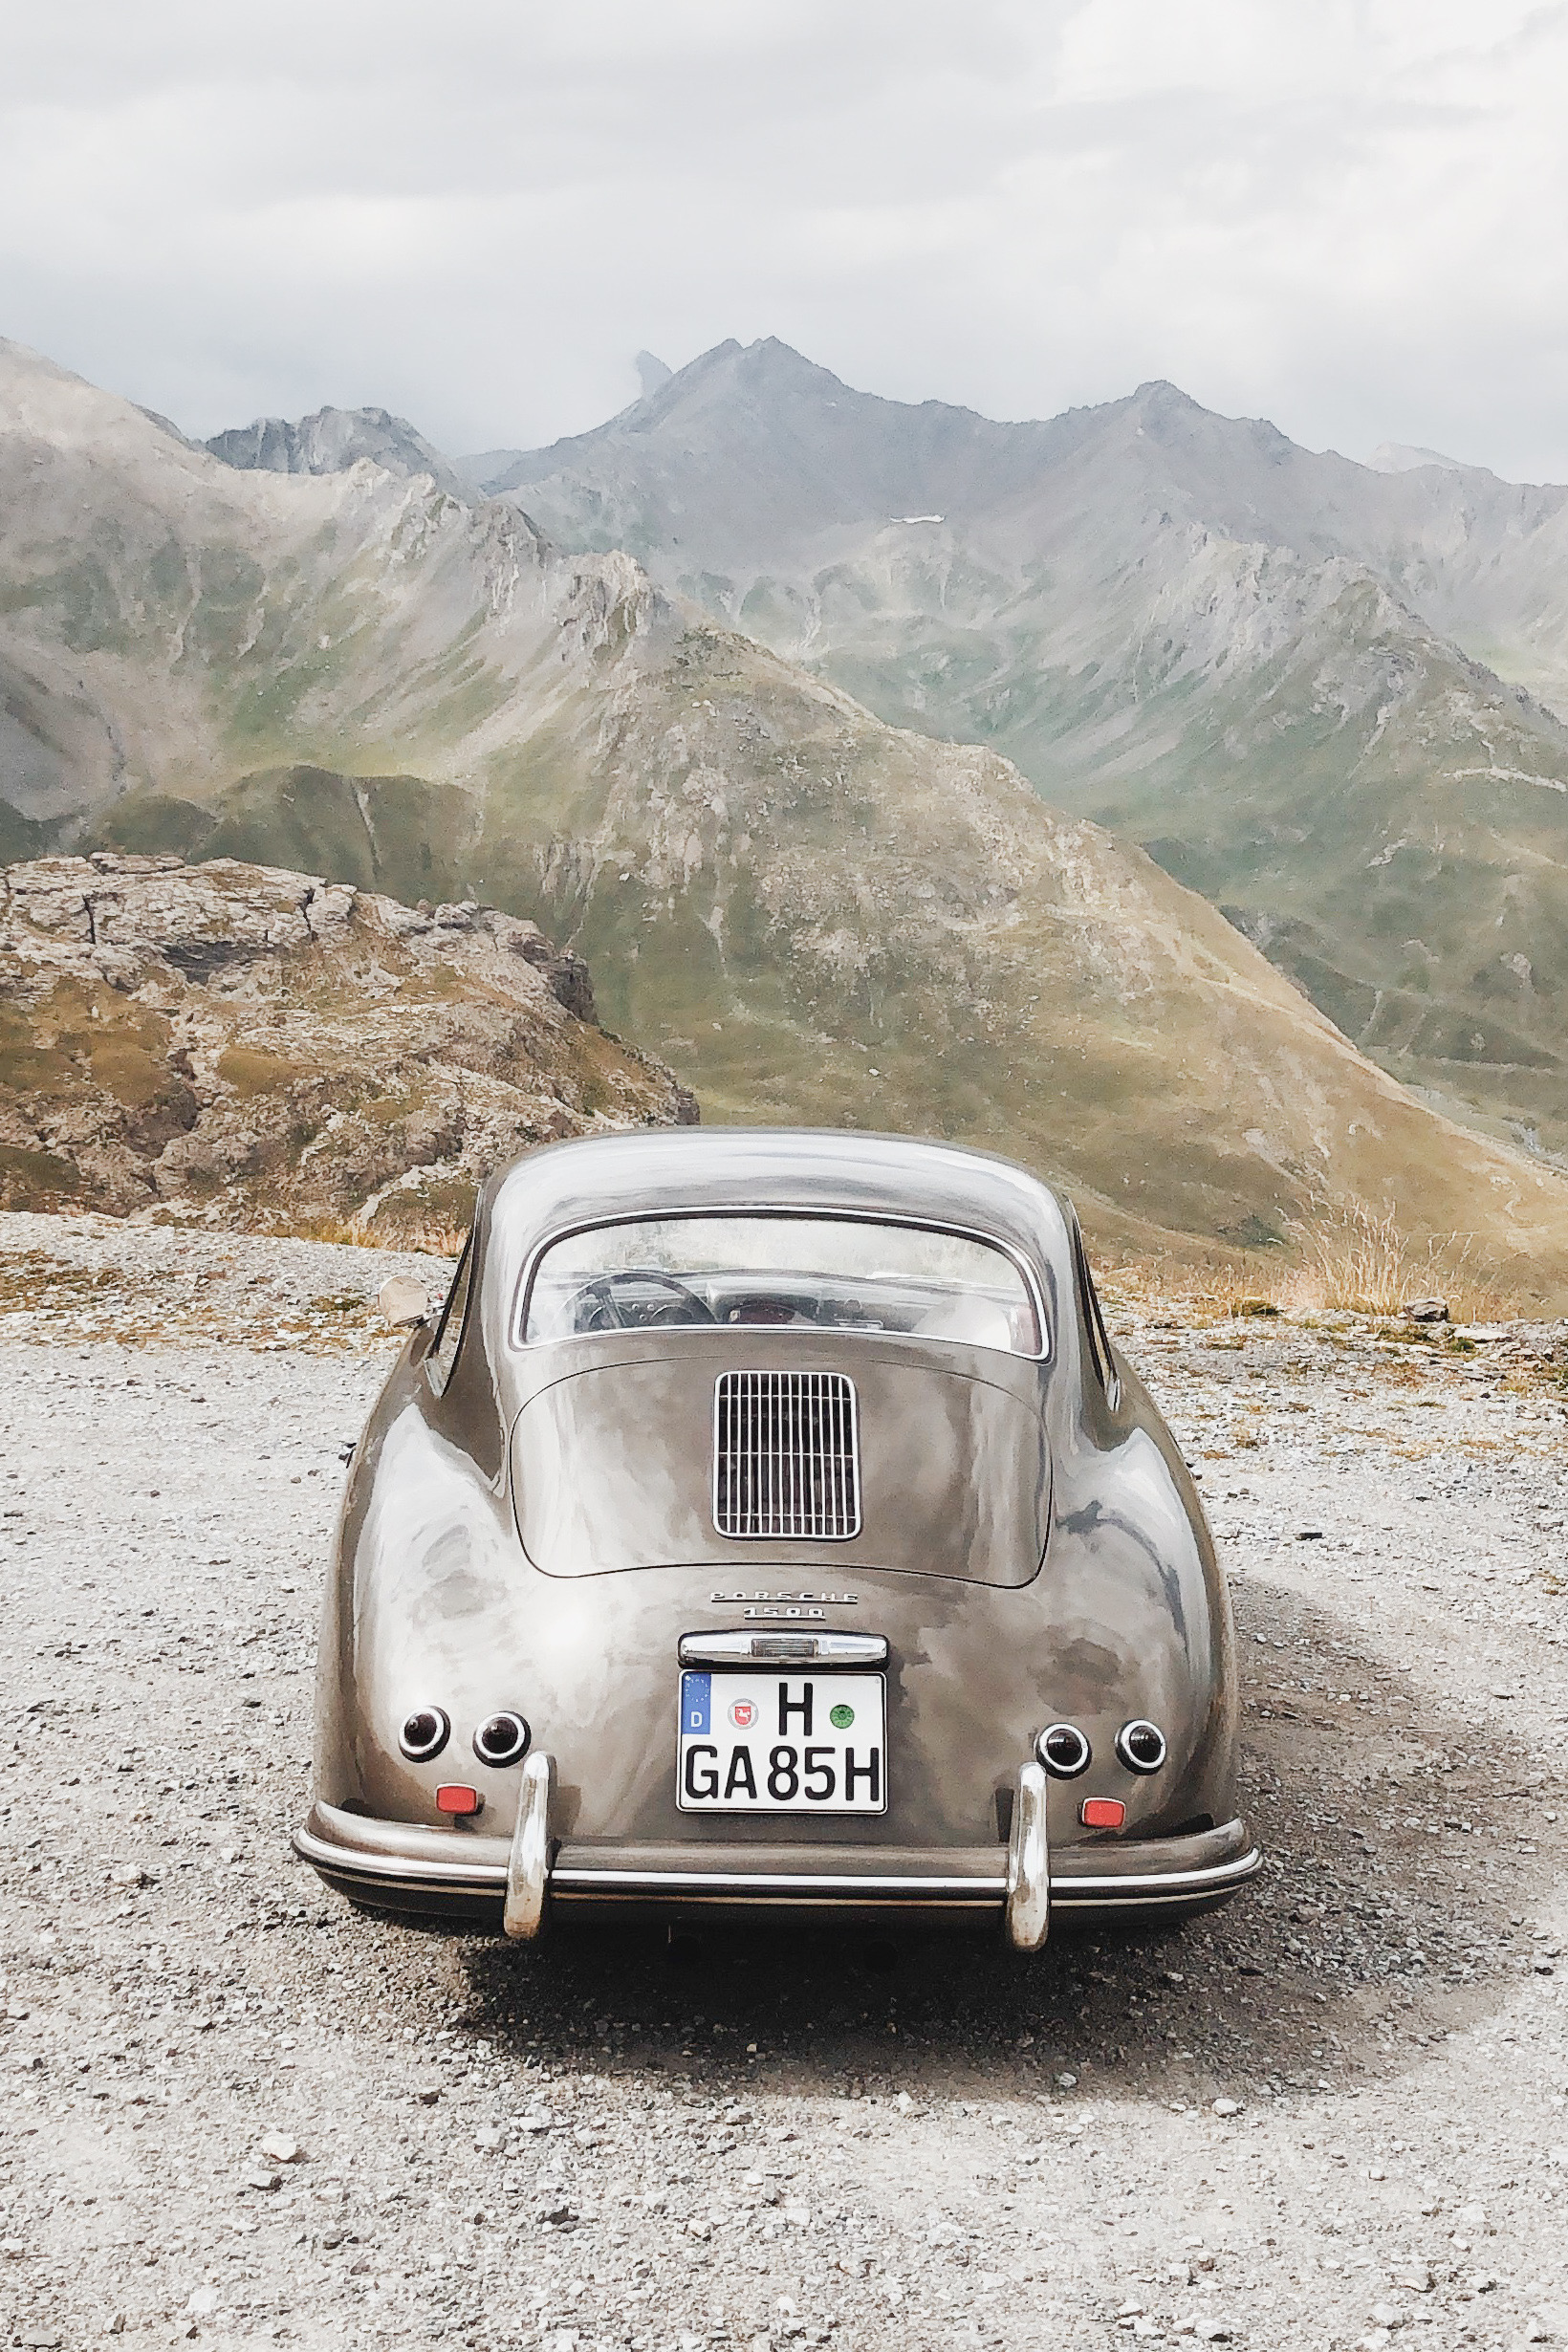 The Porsche 356 was sympathetically cared for at Porsche Classic Factory Restoration